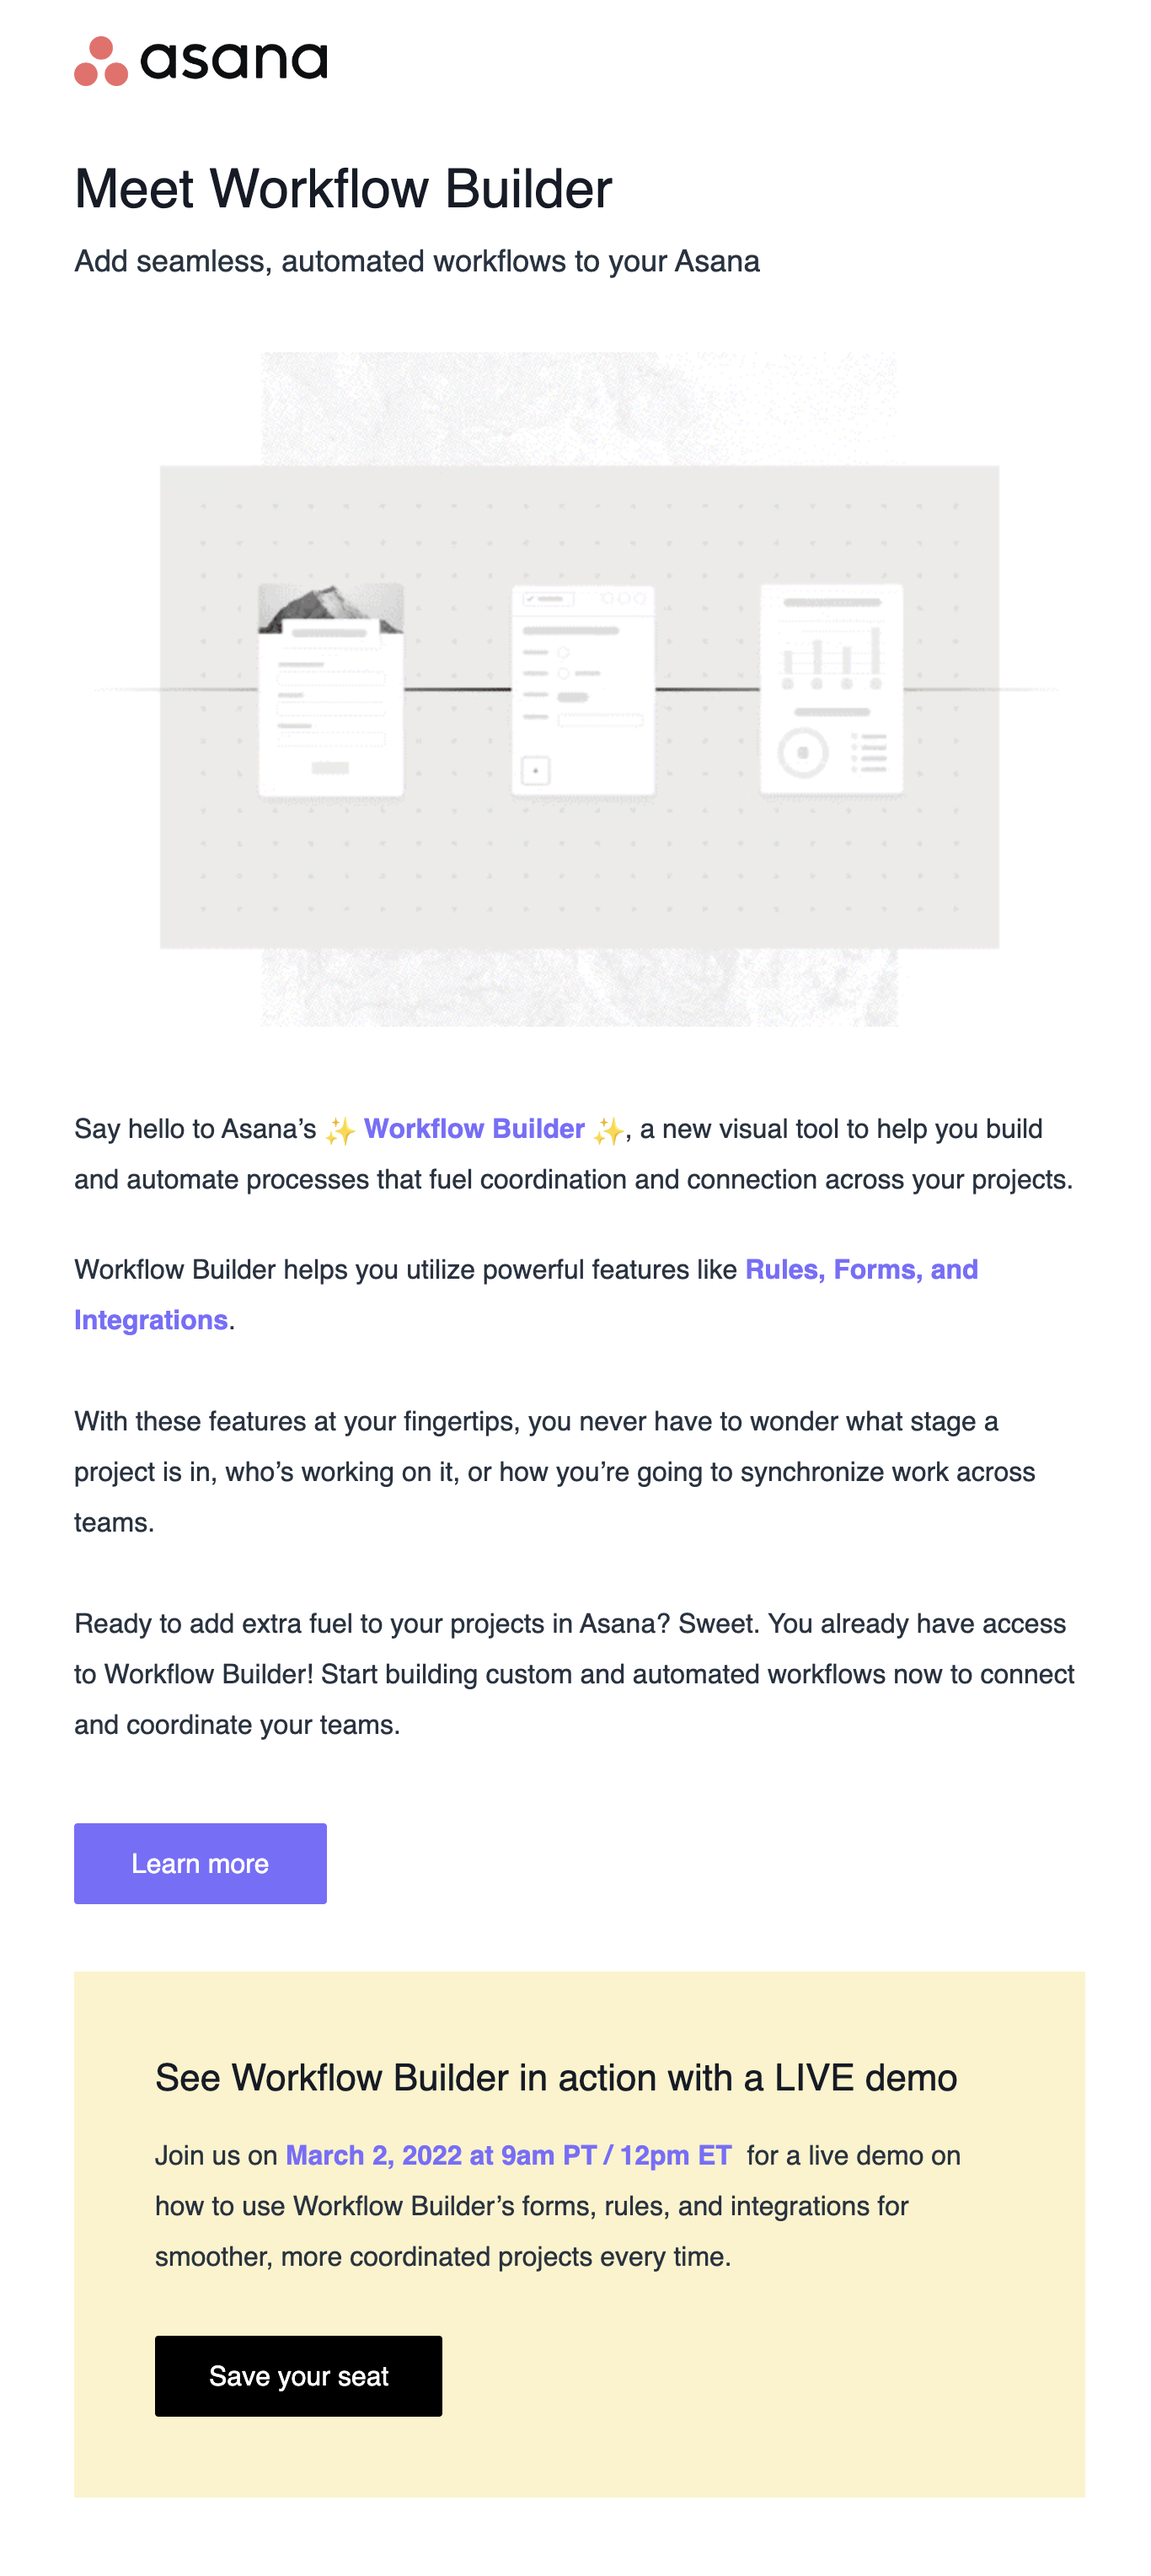 New Feature Announcement Emails: Screenshot of Asana's email talking about their latest feature